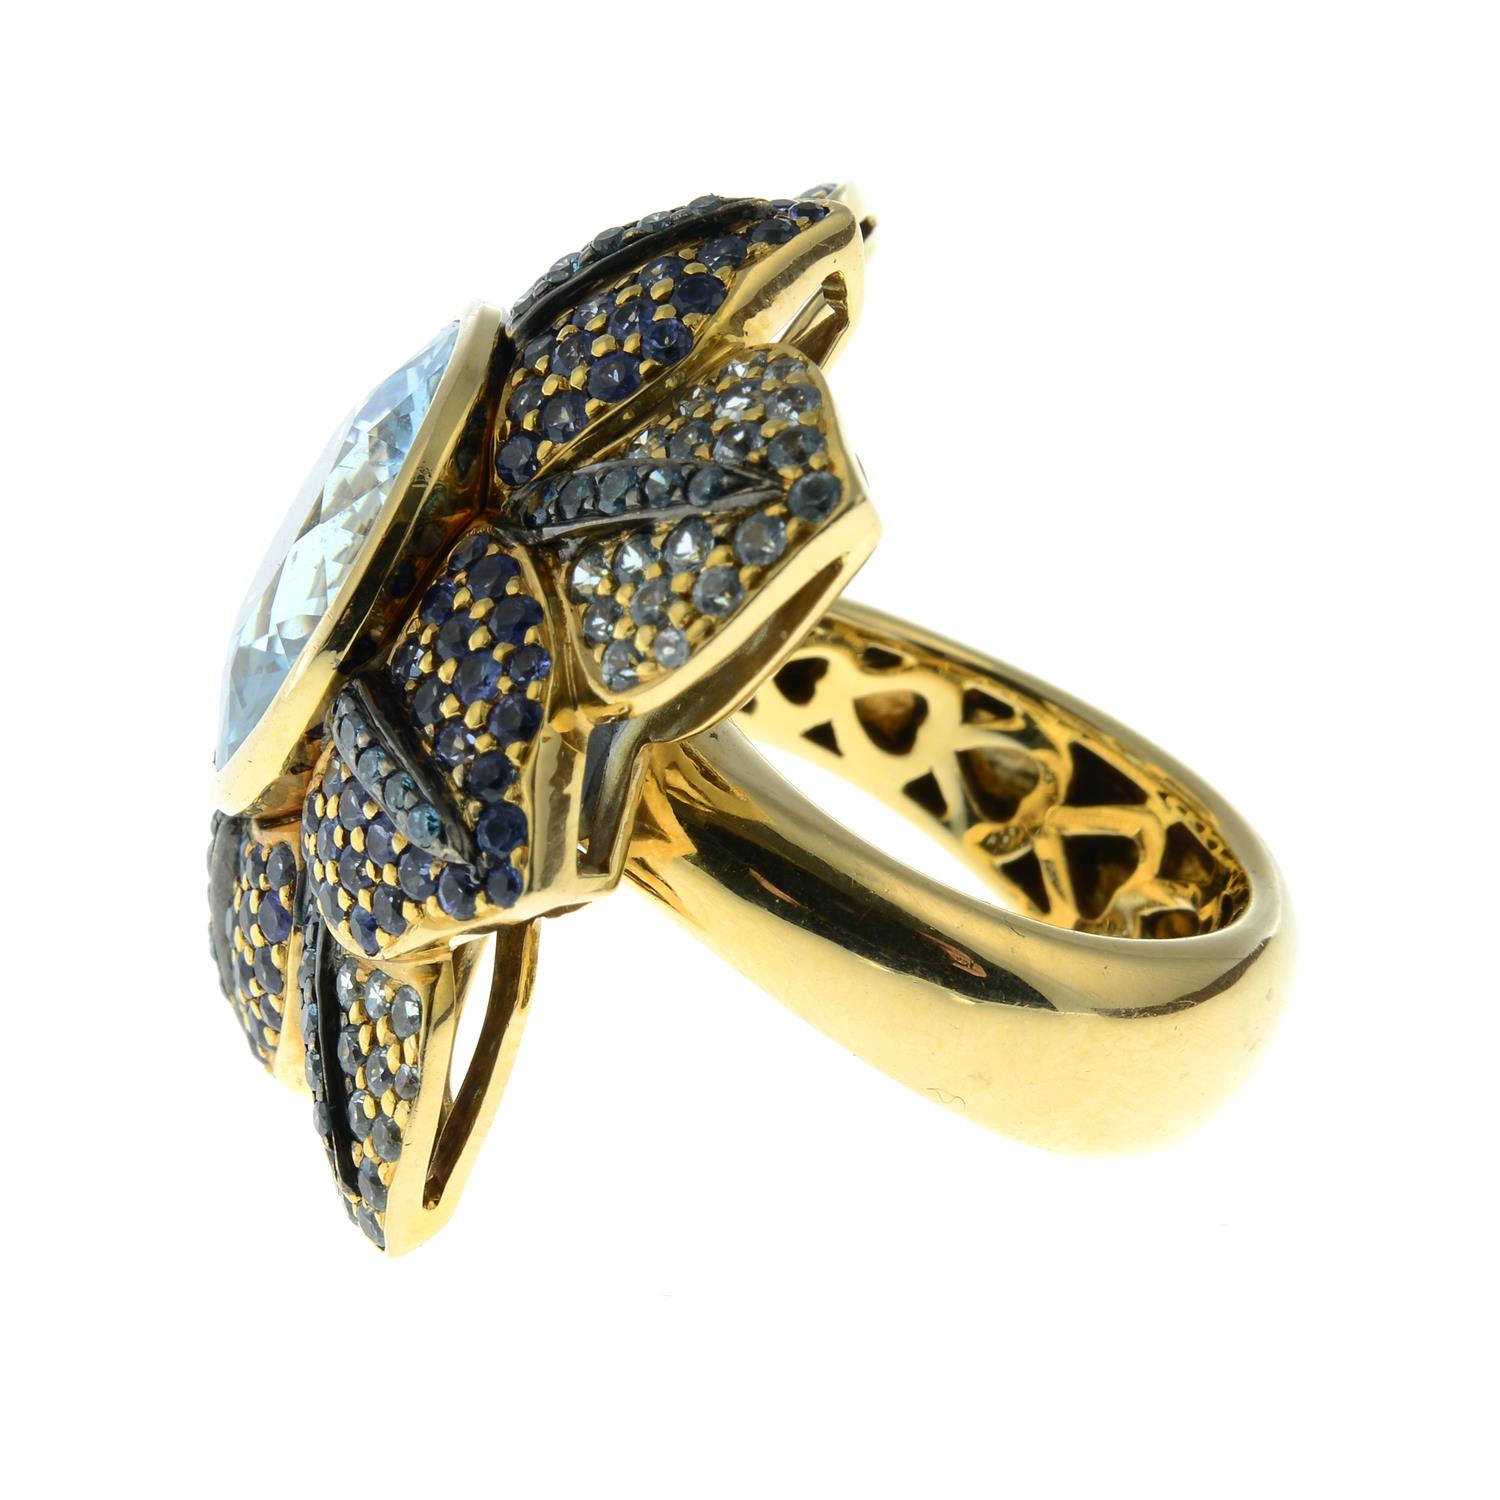 An aquamarine, sapphire and colour-treated 'blue' diamond floral ring, by Zorab Creations. - Image 3 of 5